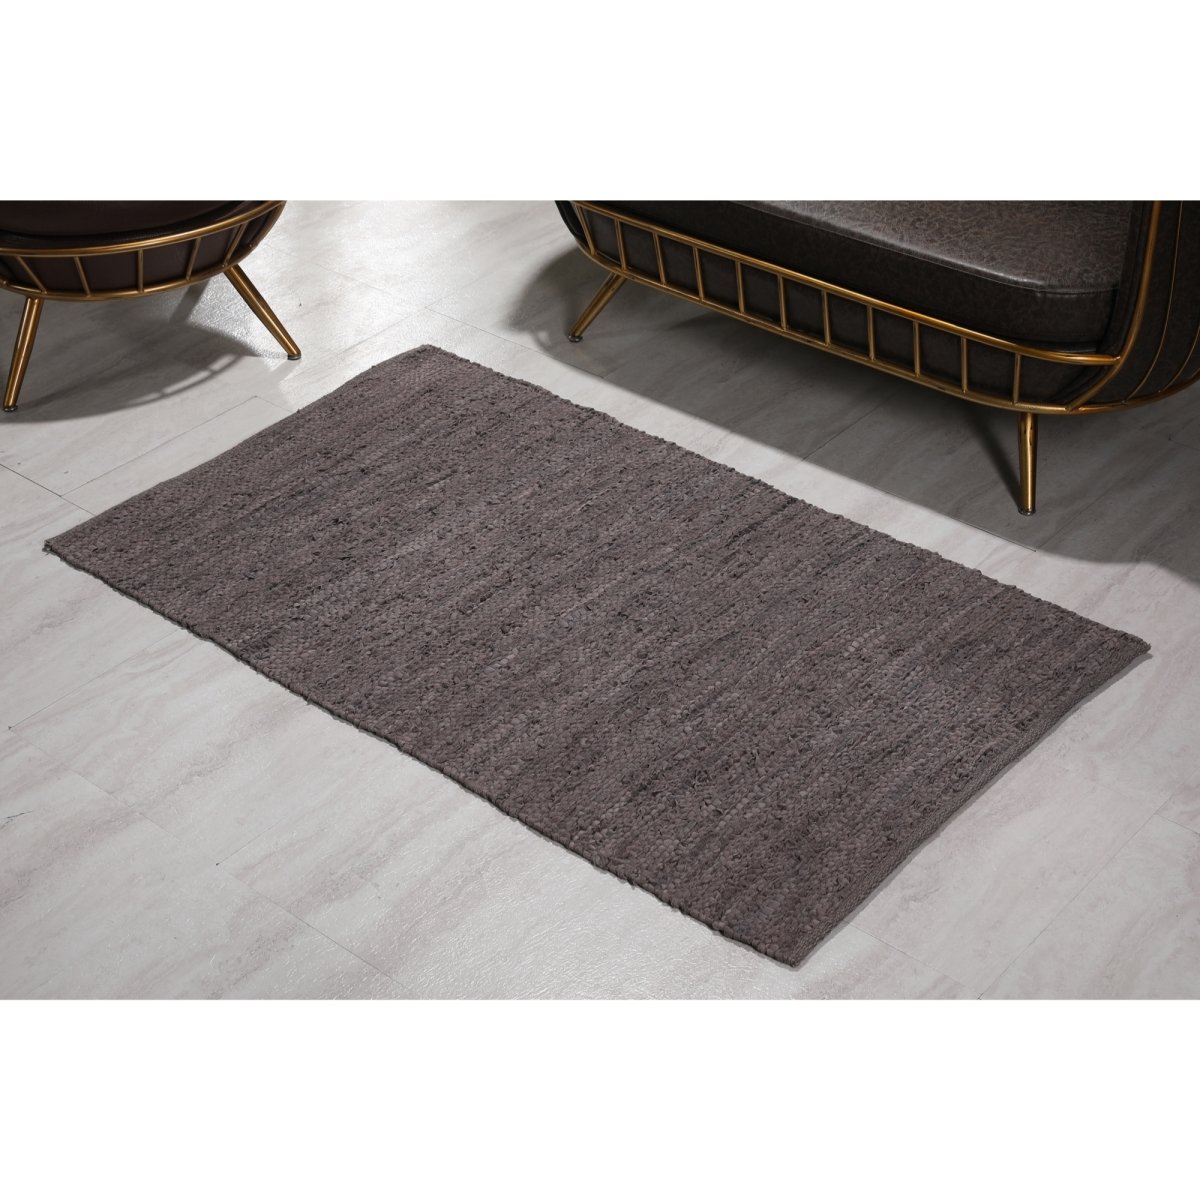 Whtxr642-m 3 X 5 Ft. Handwoven Leather & Cotton Rug, Gray